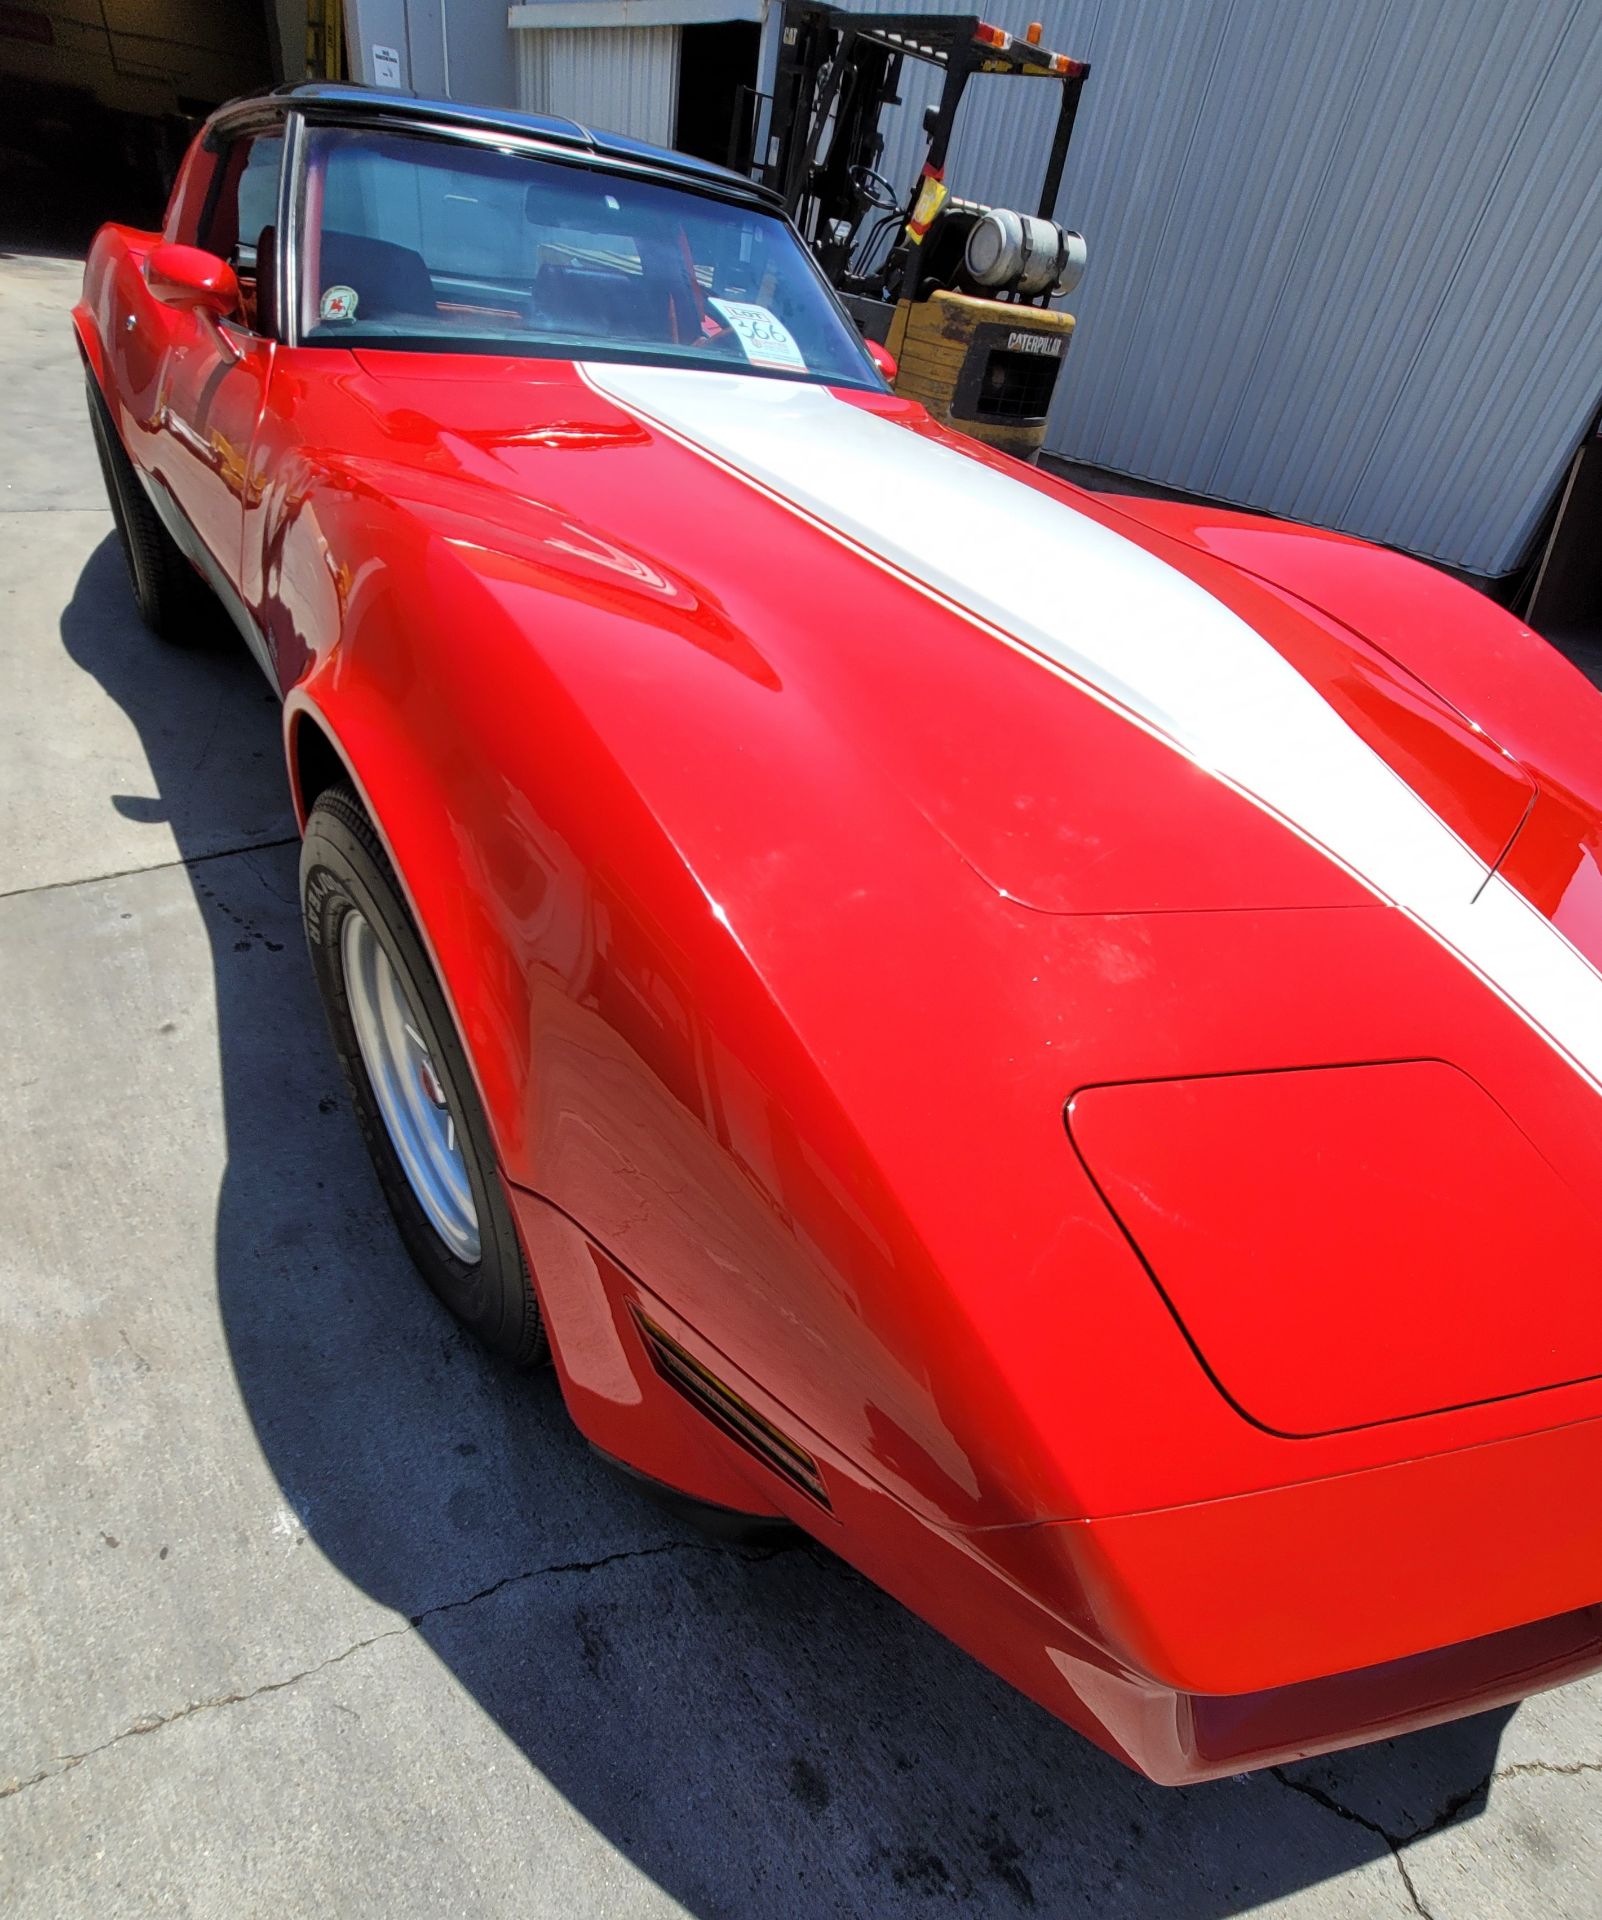 1980 CHEVROLET CORVETTE, WAS VIC EDELBROCK'S PERSONAL CAR BOUGHT FOR R&D, RED INTERIOR, TITLE ONLY. - Image 50 of 70